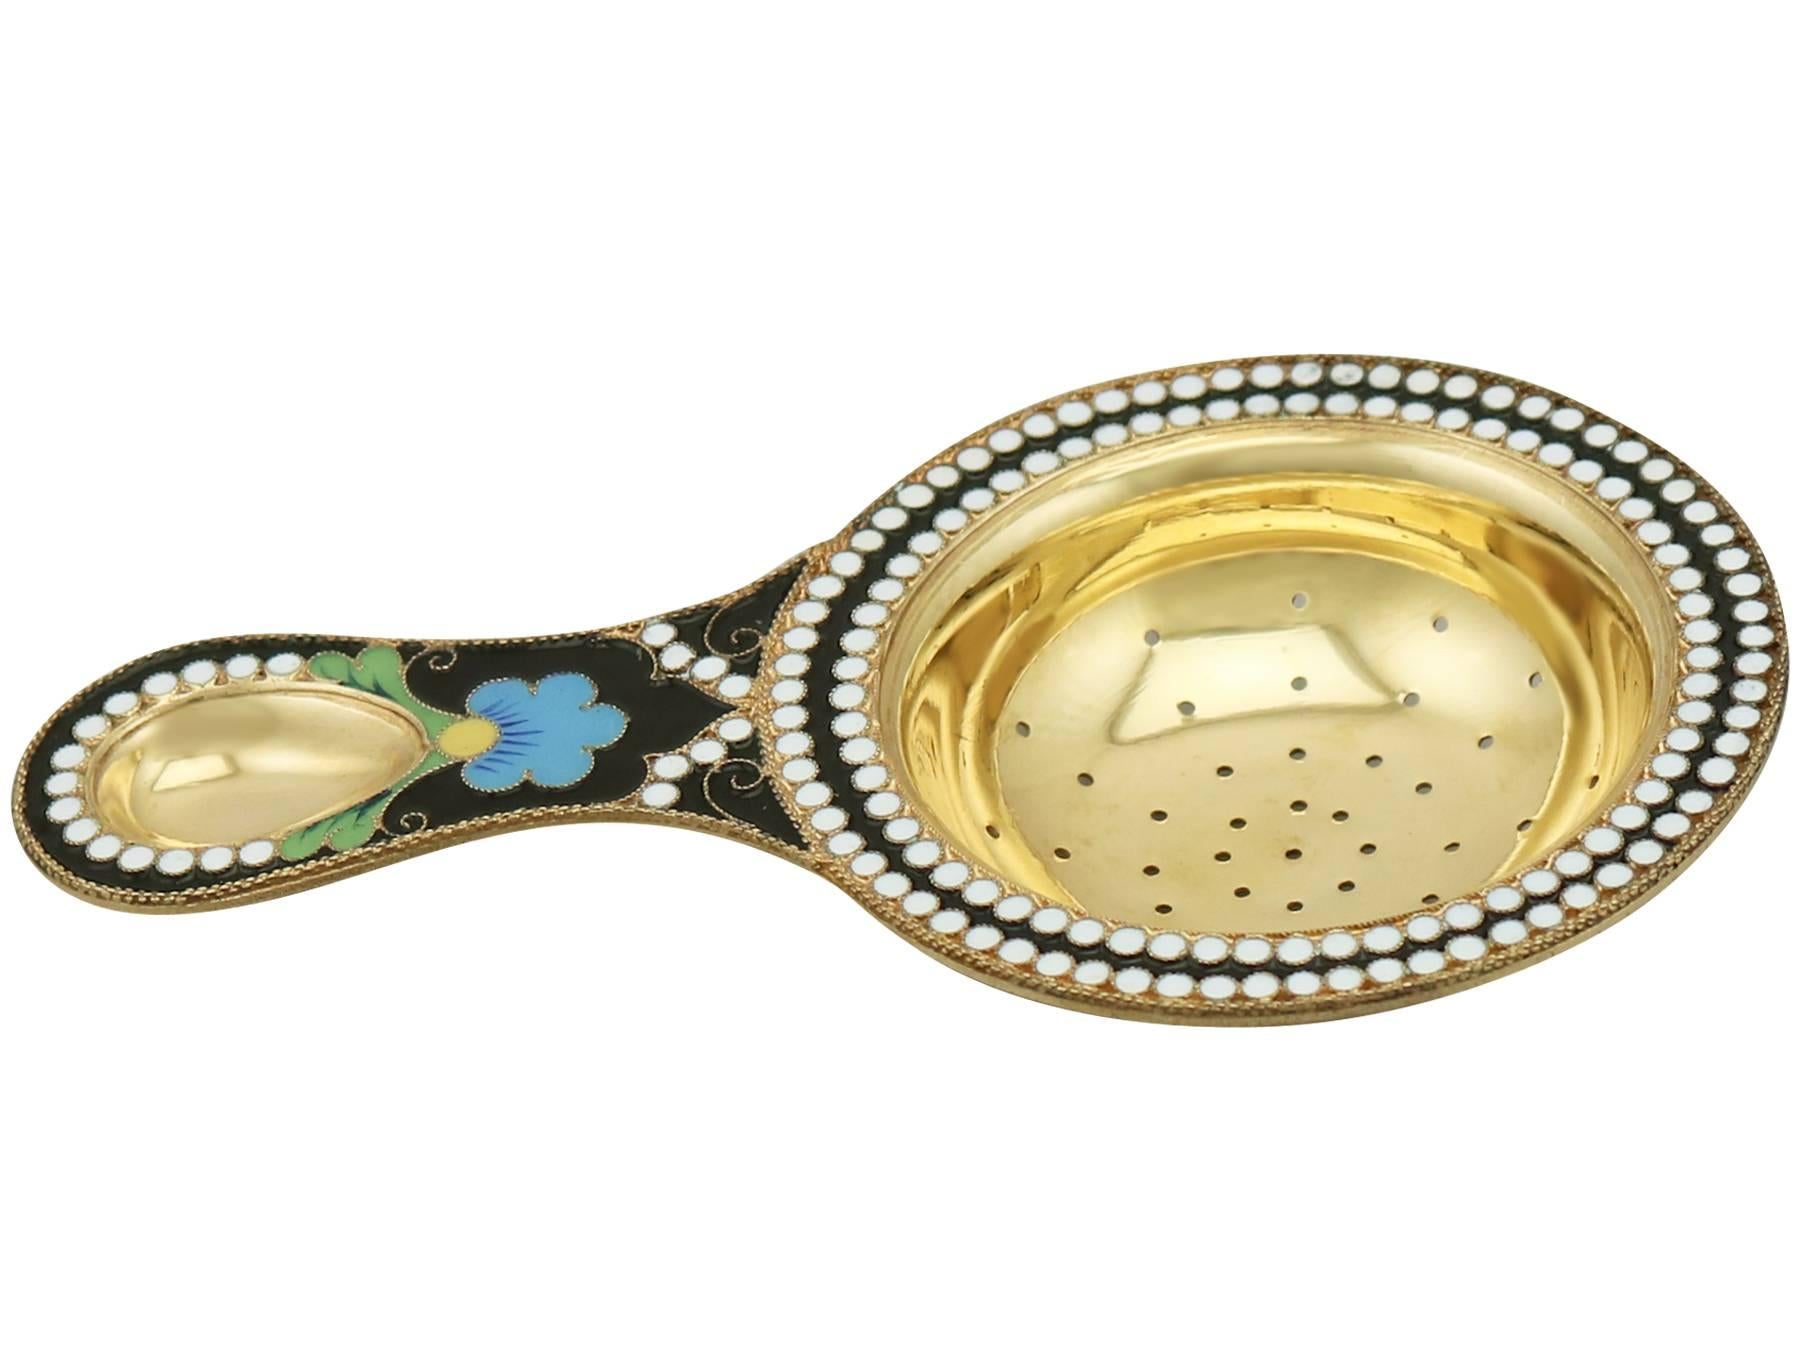 An exceptional, fine and impressive vintage Russian silver gilt and polychrome cloisonné enamel tea strainer; an addition to our silver tea ware collection.

This exceptional vintage Russian silver gilt and polychrome cloisonné enamel tea strainer